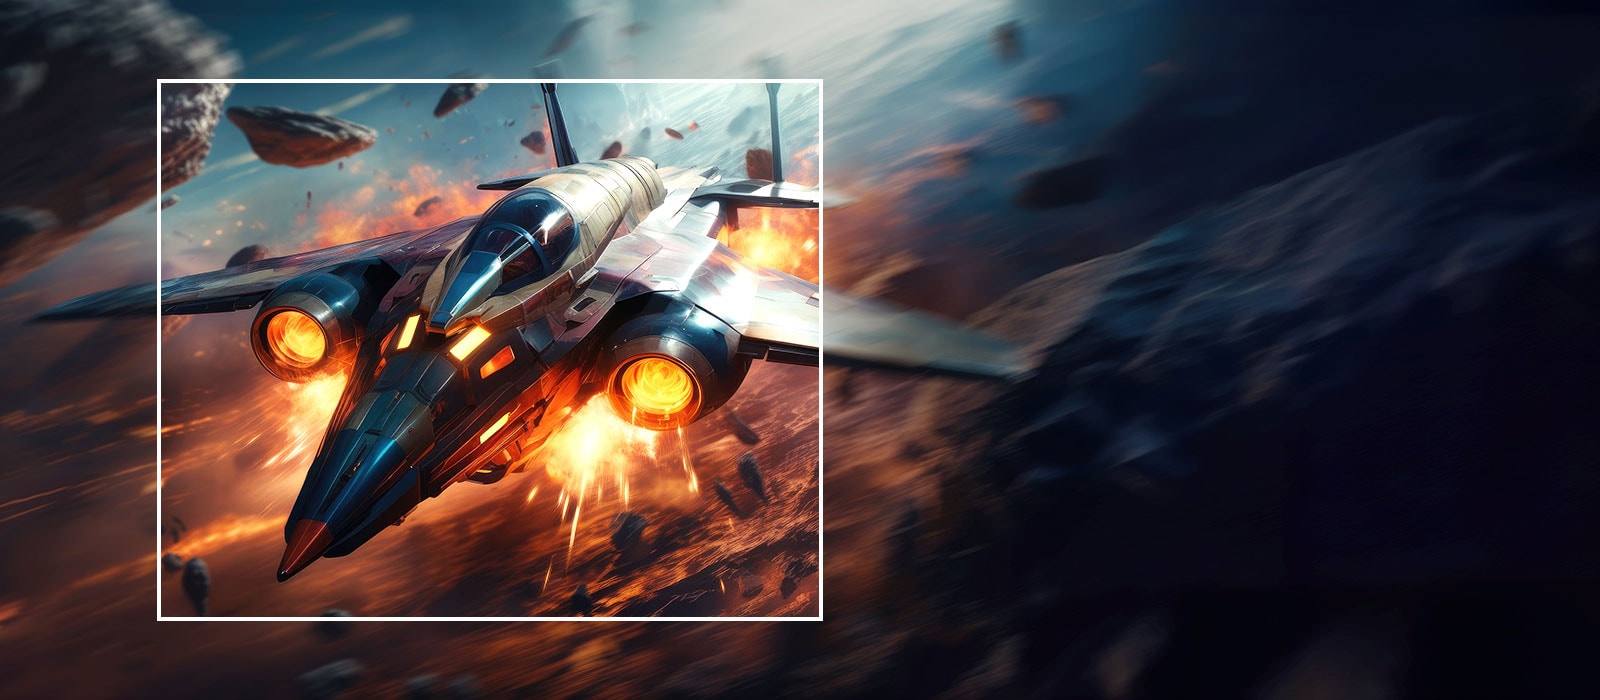 Dynamic, fast-paced fighter jet imagery